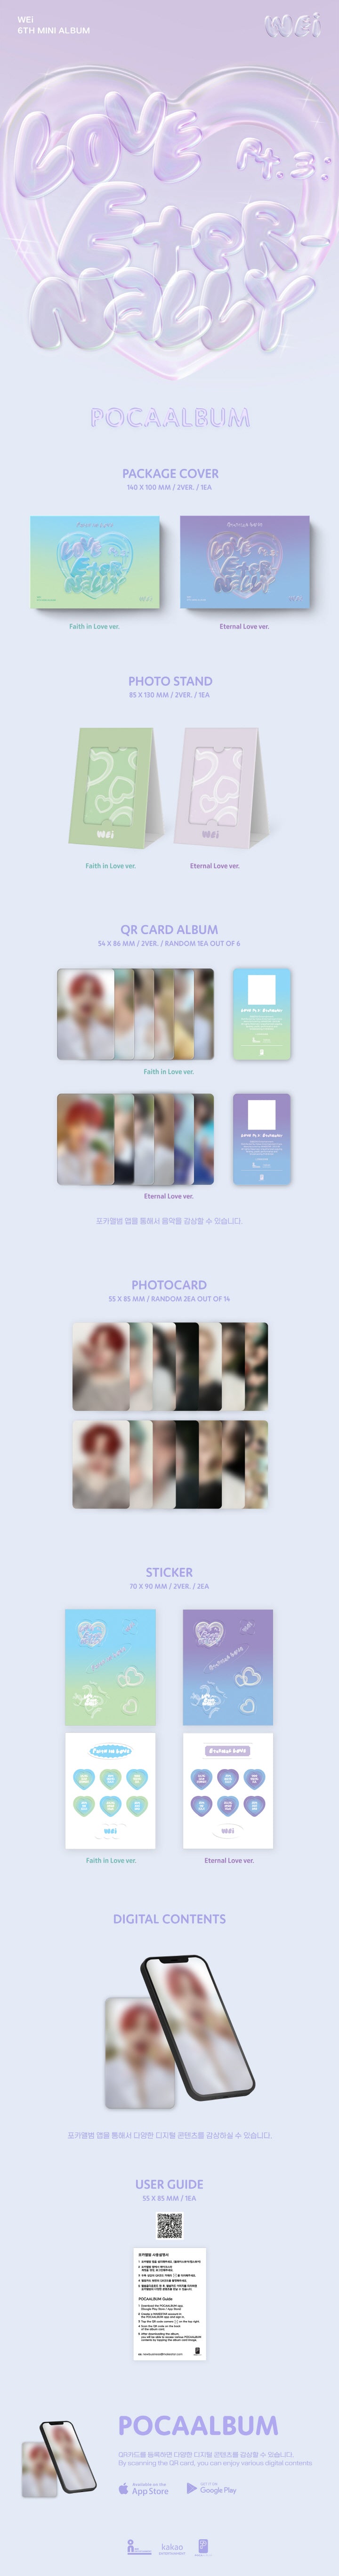 1 QR Card Album (random out of 6 types)
1 Photo Stand
2 Photo Cards (random out of 14 types)
2 Stickers